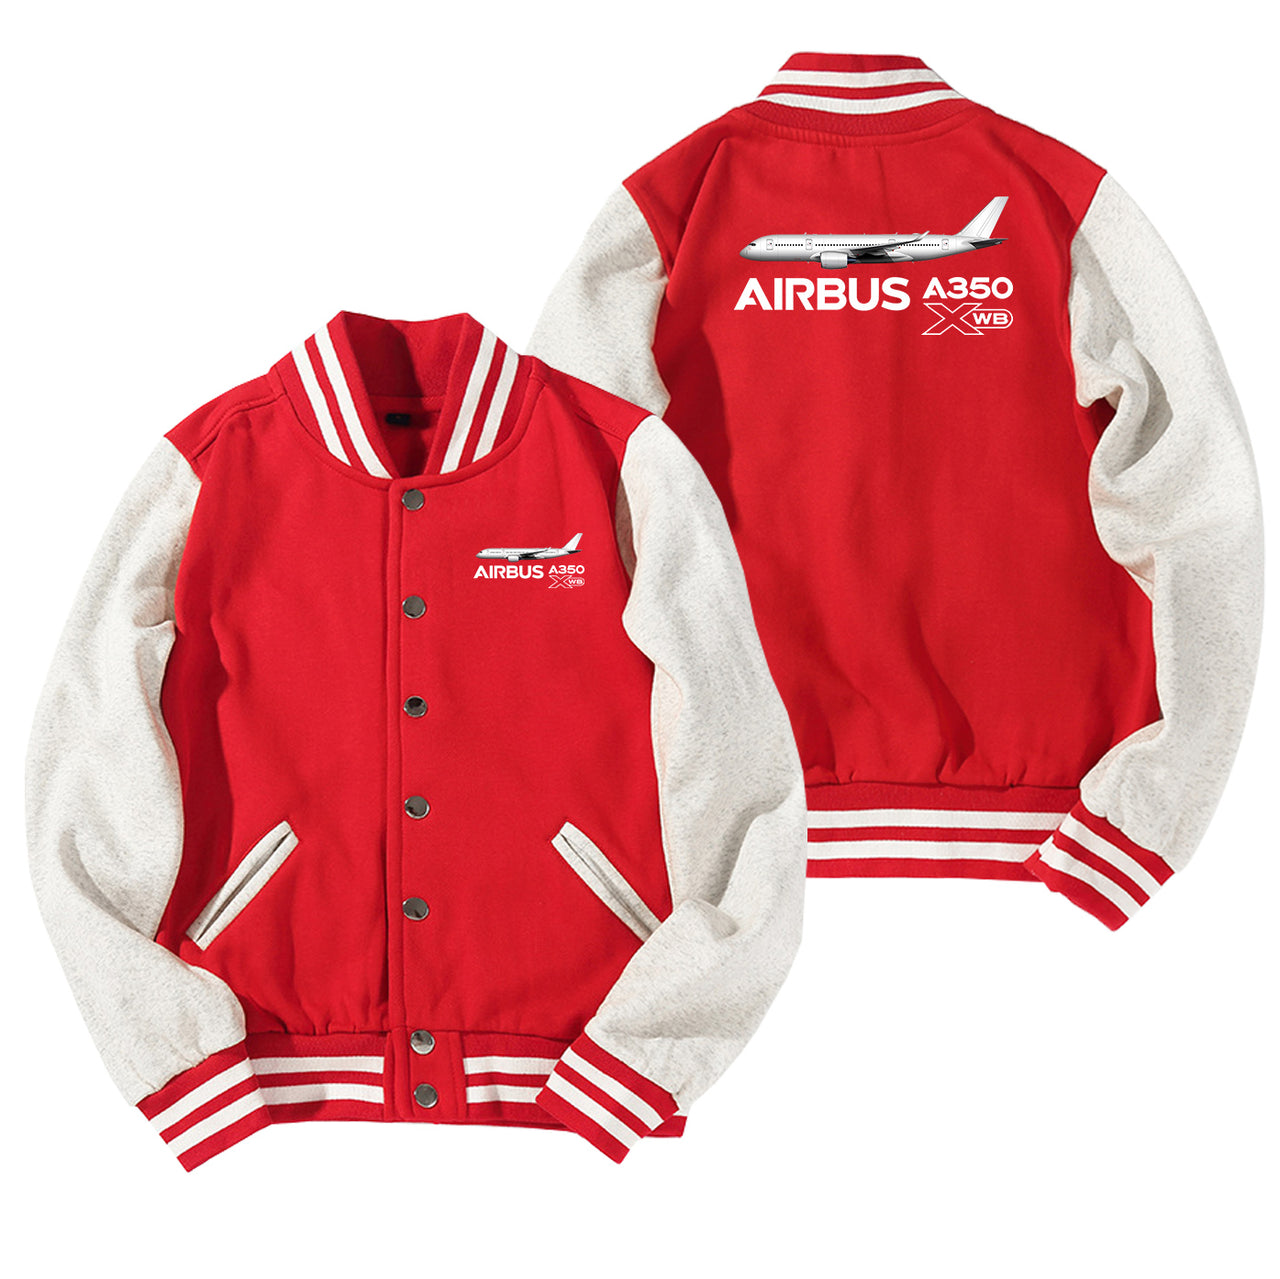 The Airbus A350 WXB Designed Baseball Style Jackets